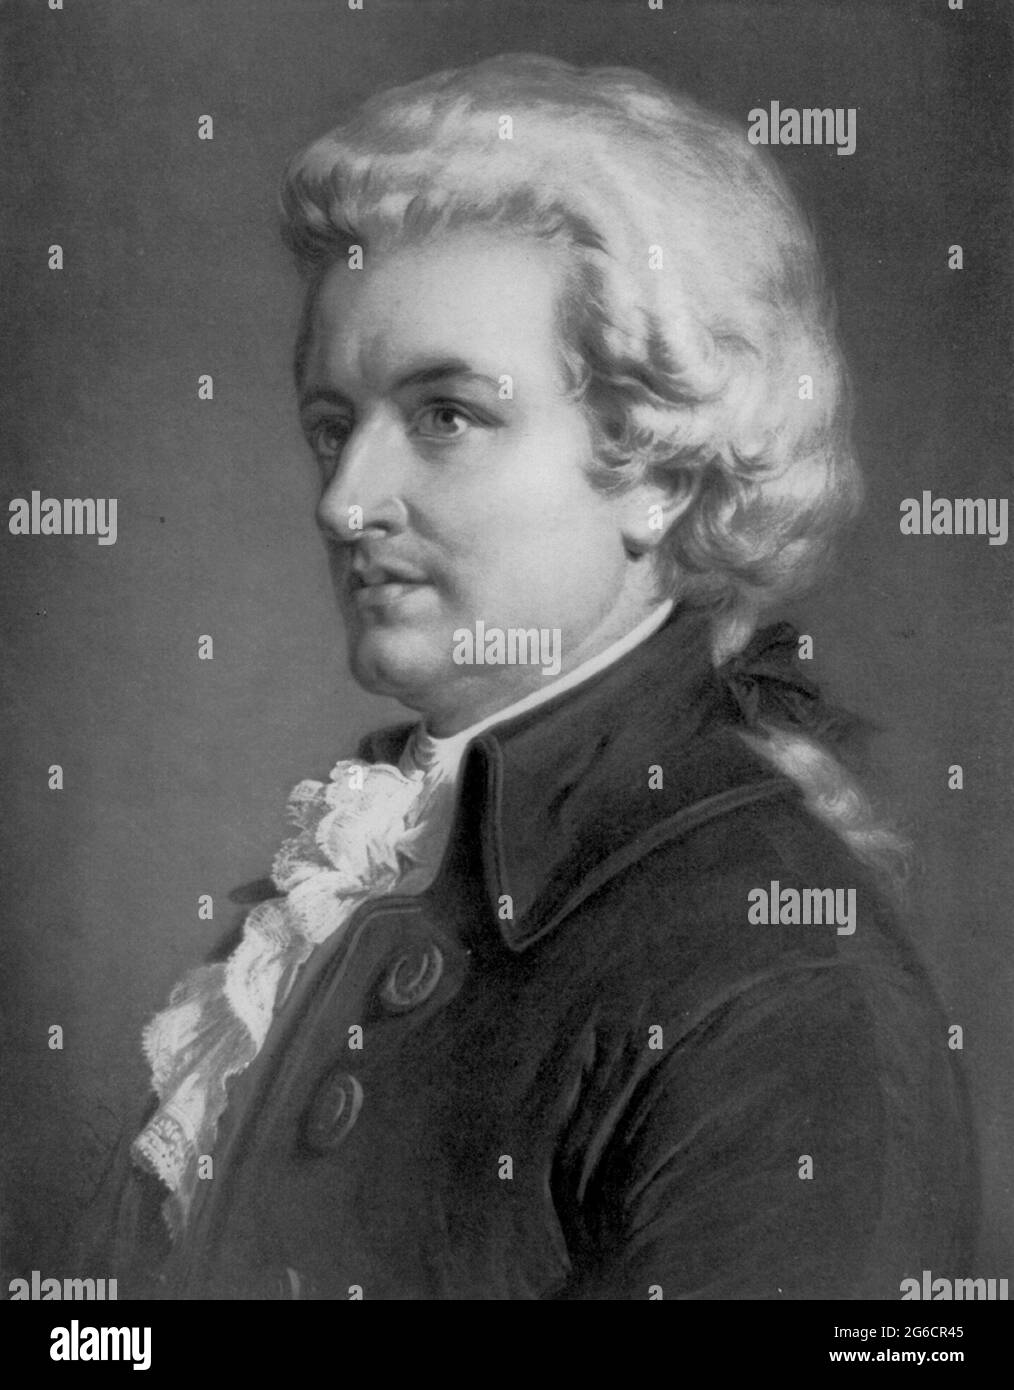 EUROPE - circa 1790 - A head and shoulders portrait of the famous late composer Wolfgang Amadeus Mozart (1756-1791) - Photo: Geopix Stock Photo